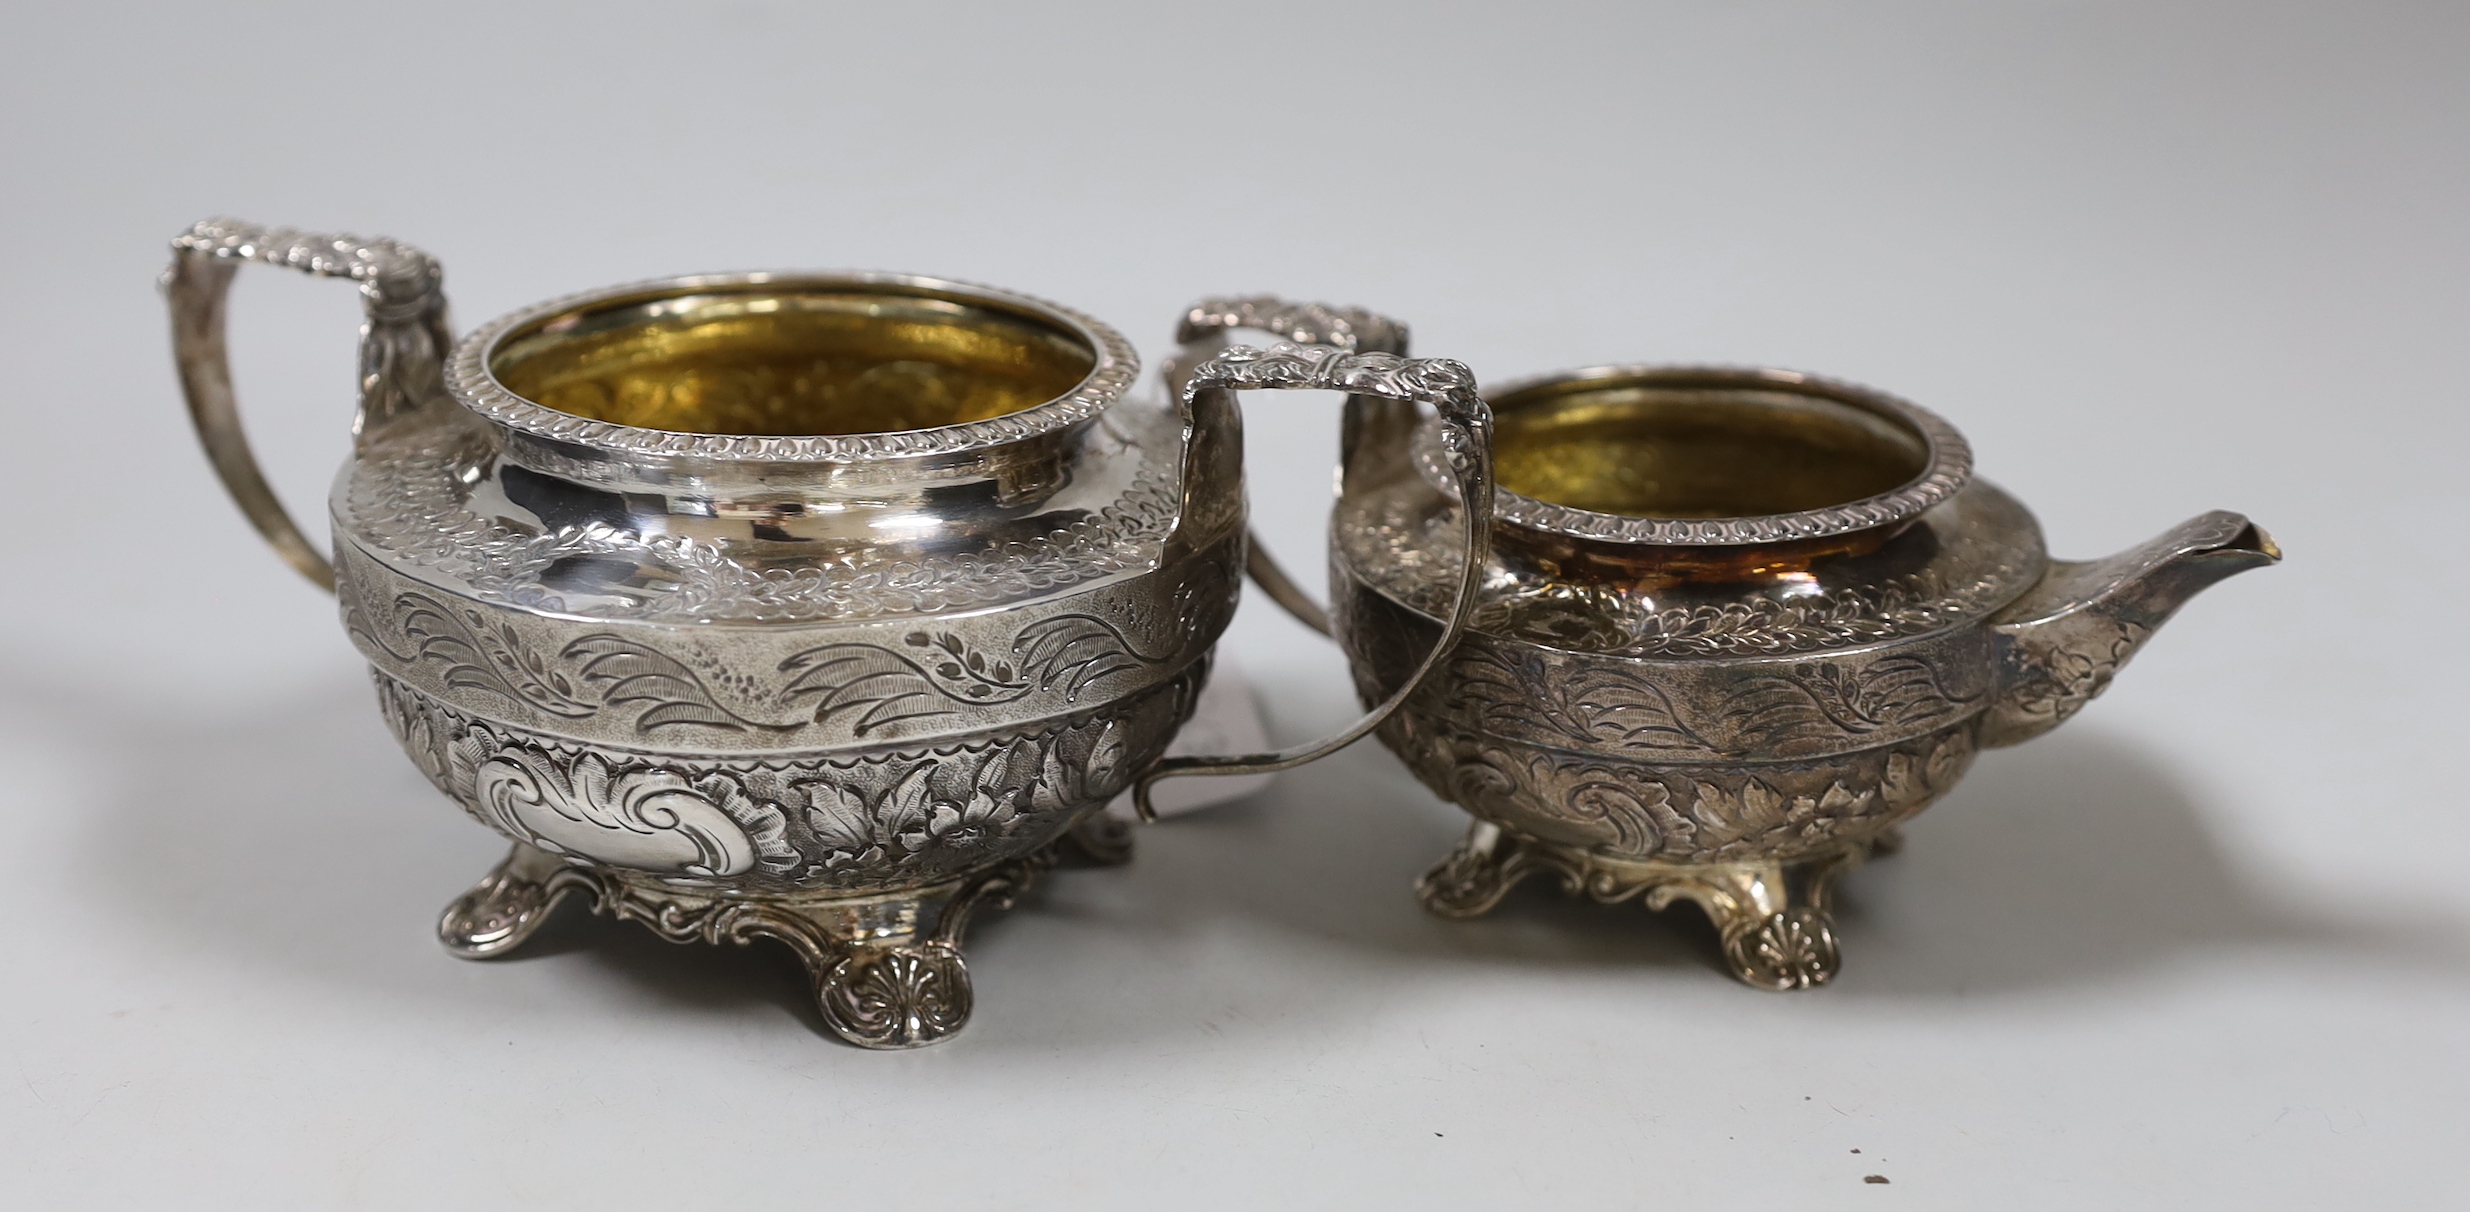 A George IV silver cream jug and two handled sugar bowl by Adey Bellamy Savory, London, 1825, 16.8oz (see lot 811 for a near matching teapot)